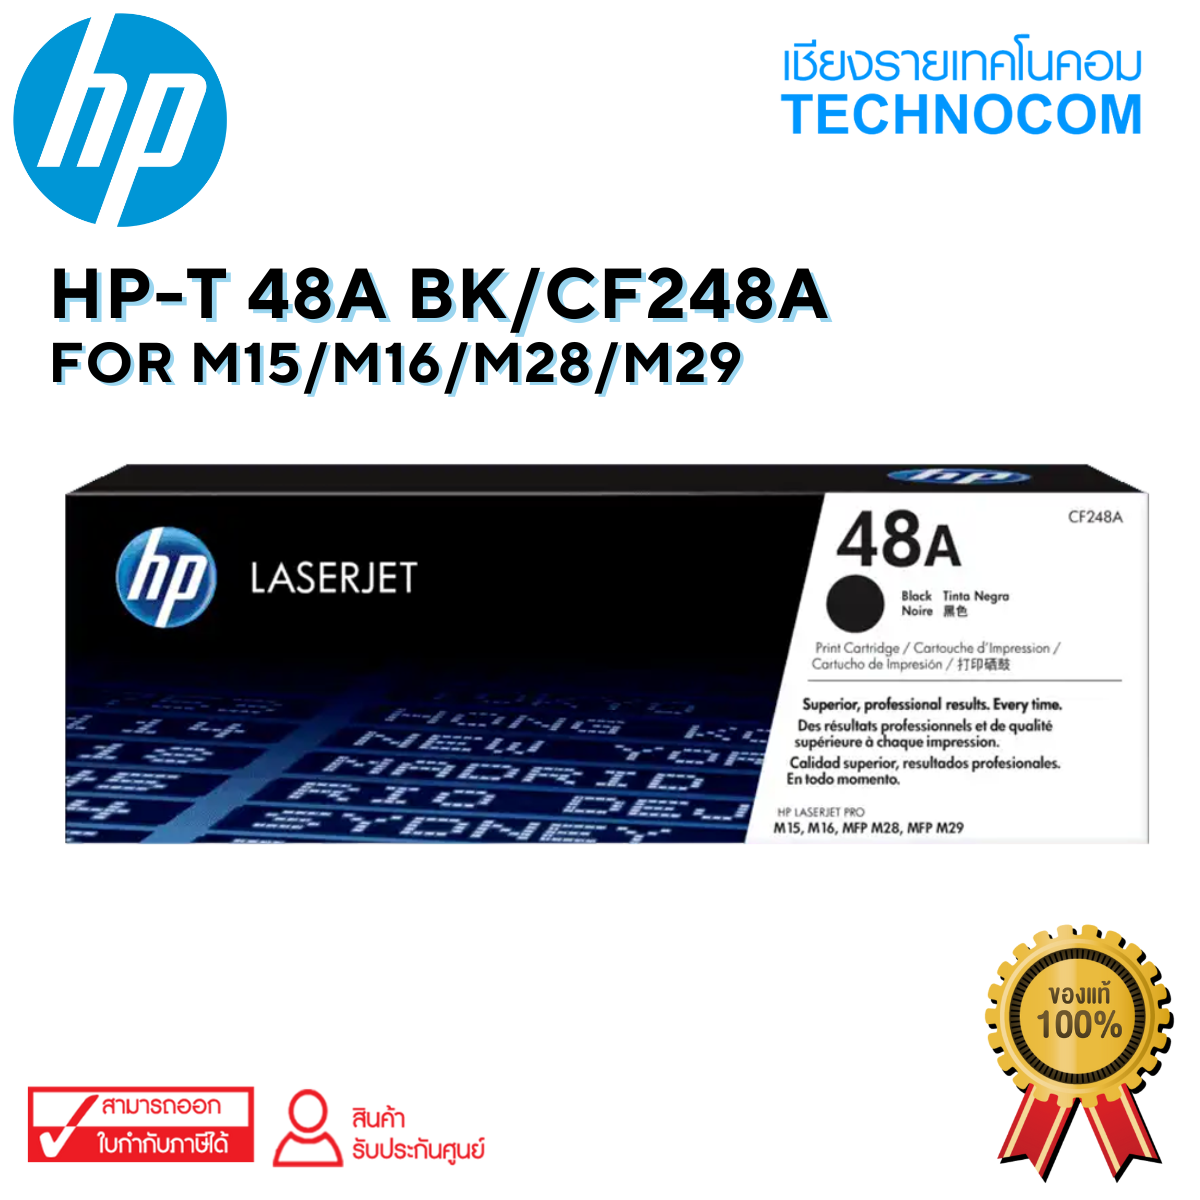 HP-T 48A BK/CF248A For M15/M16/M28/M29